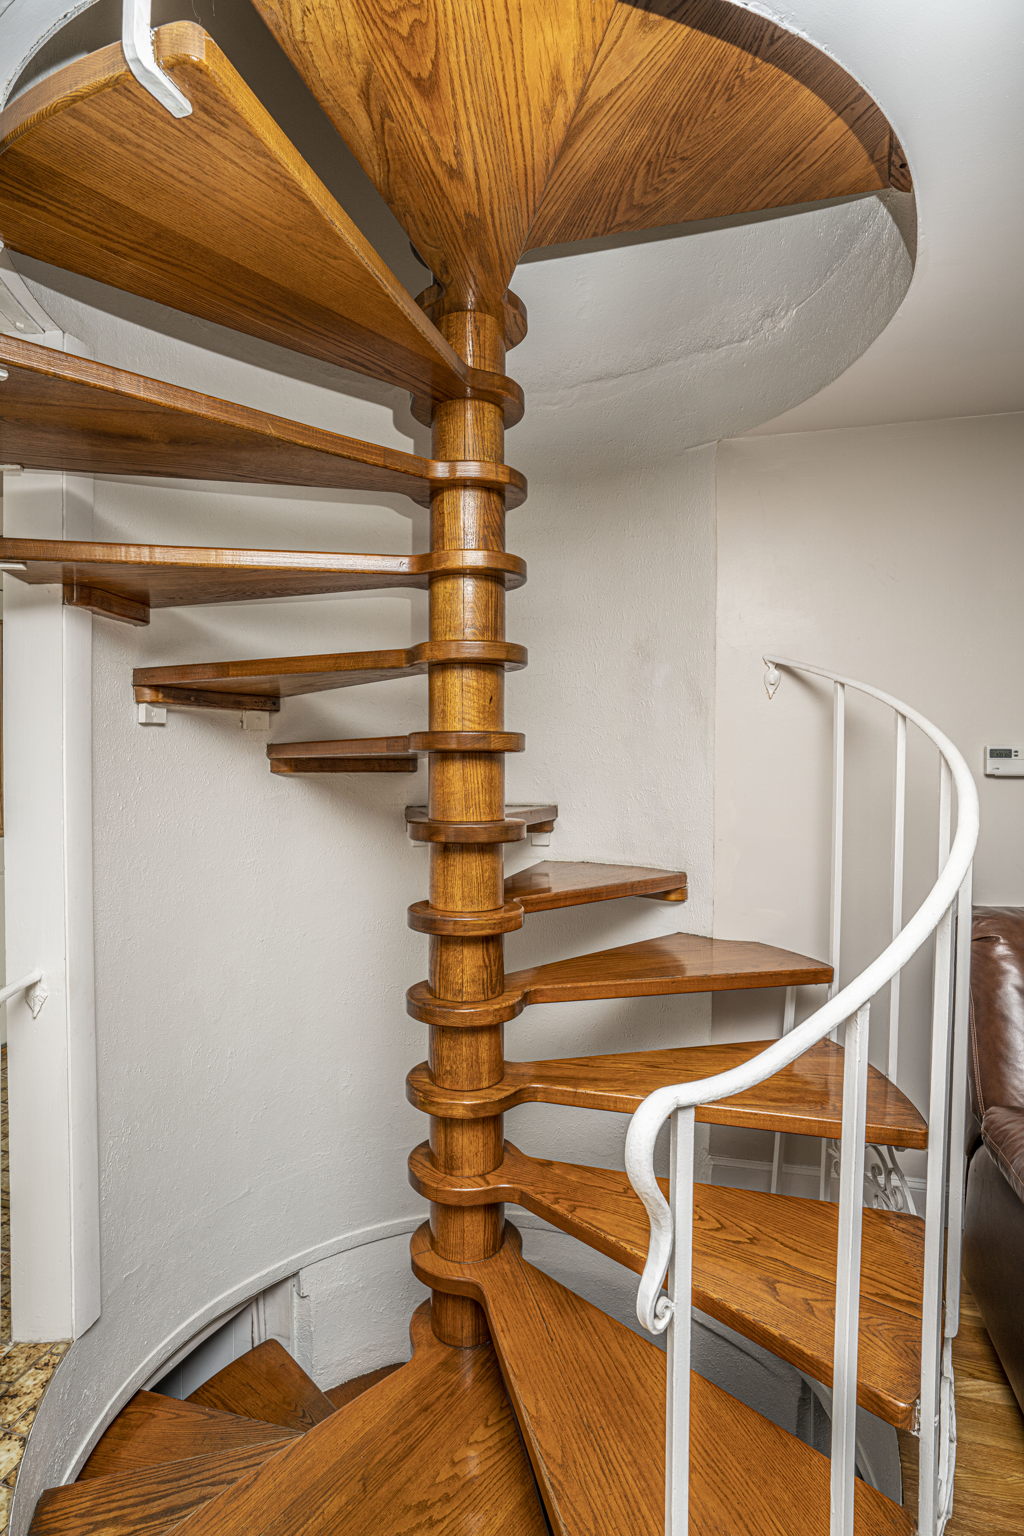 Spiral staircase up